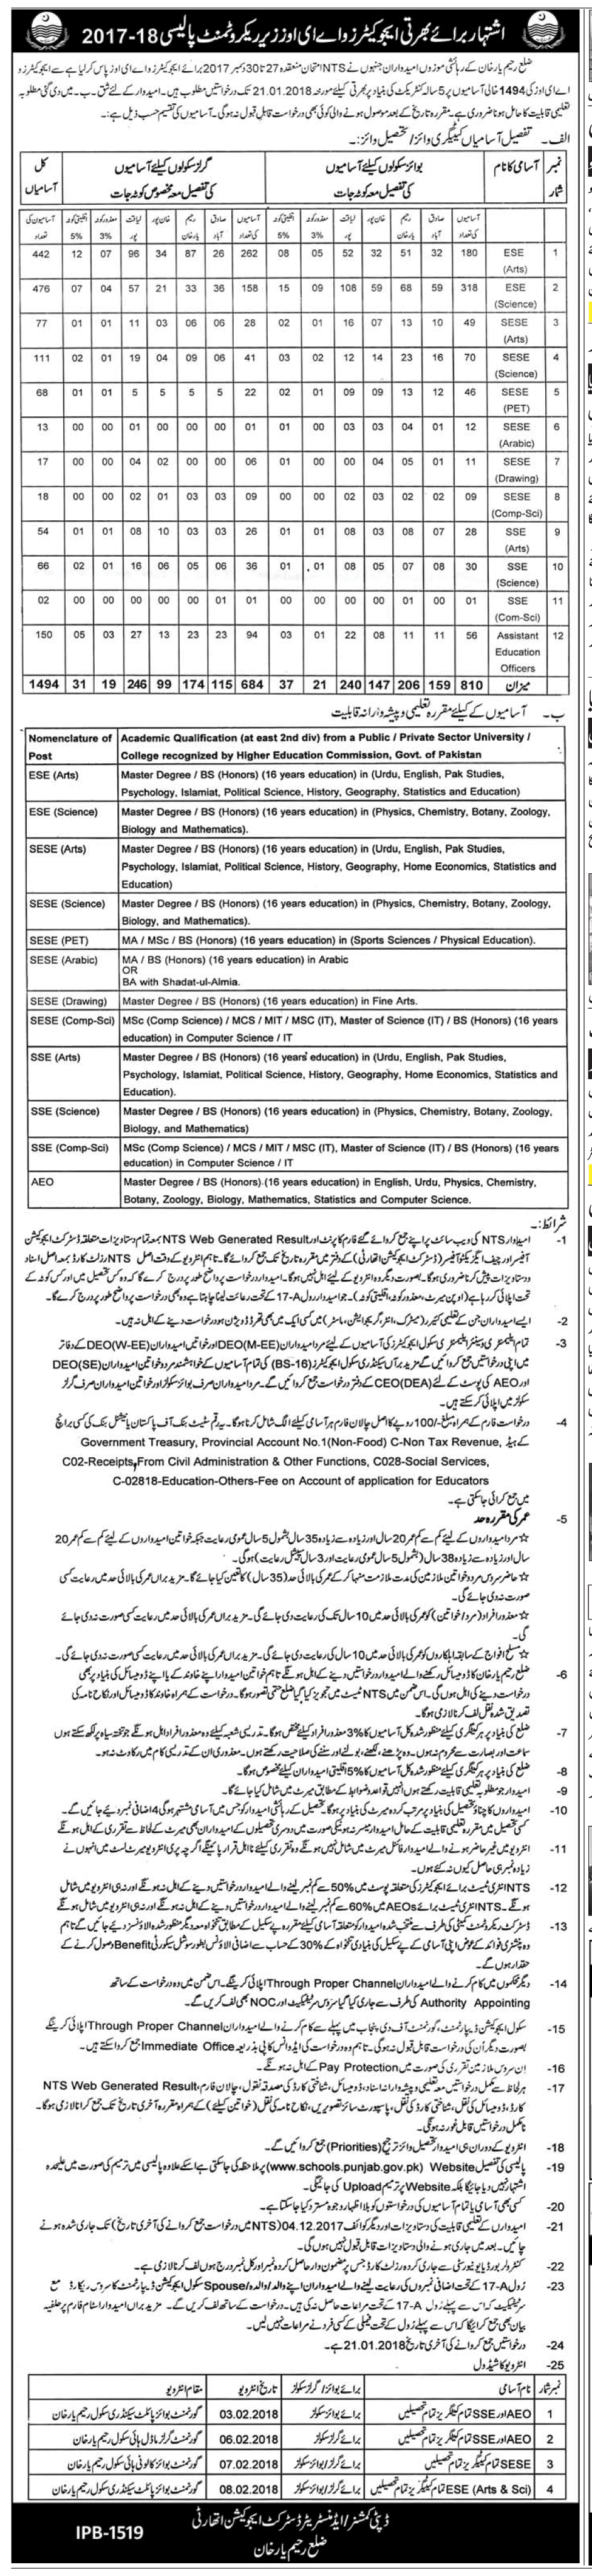 ADVERTISEMENT FOR INDUCTION OF EDUCATORS AND AEO RECRUITMENT POLICY 2017-18 RAHIMYARKHAN